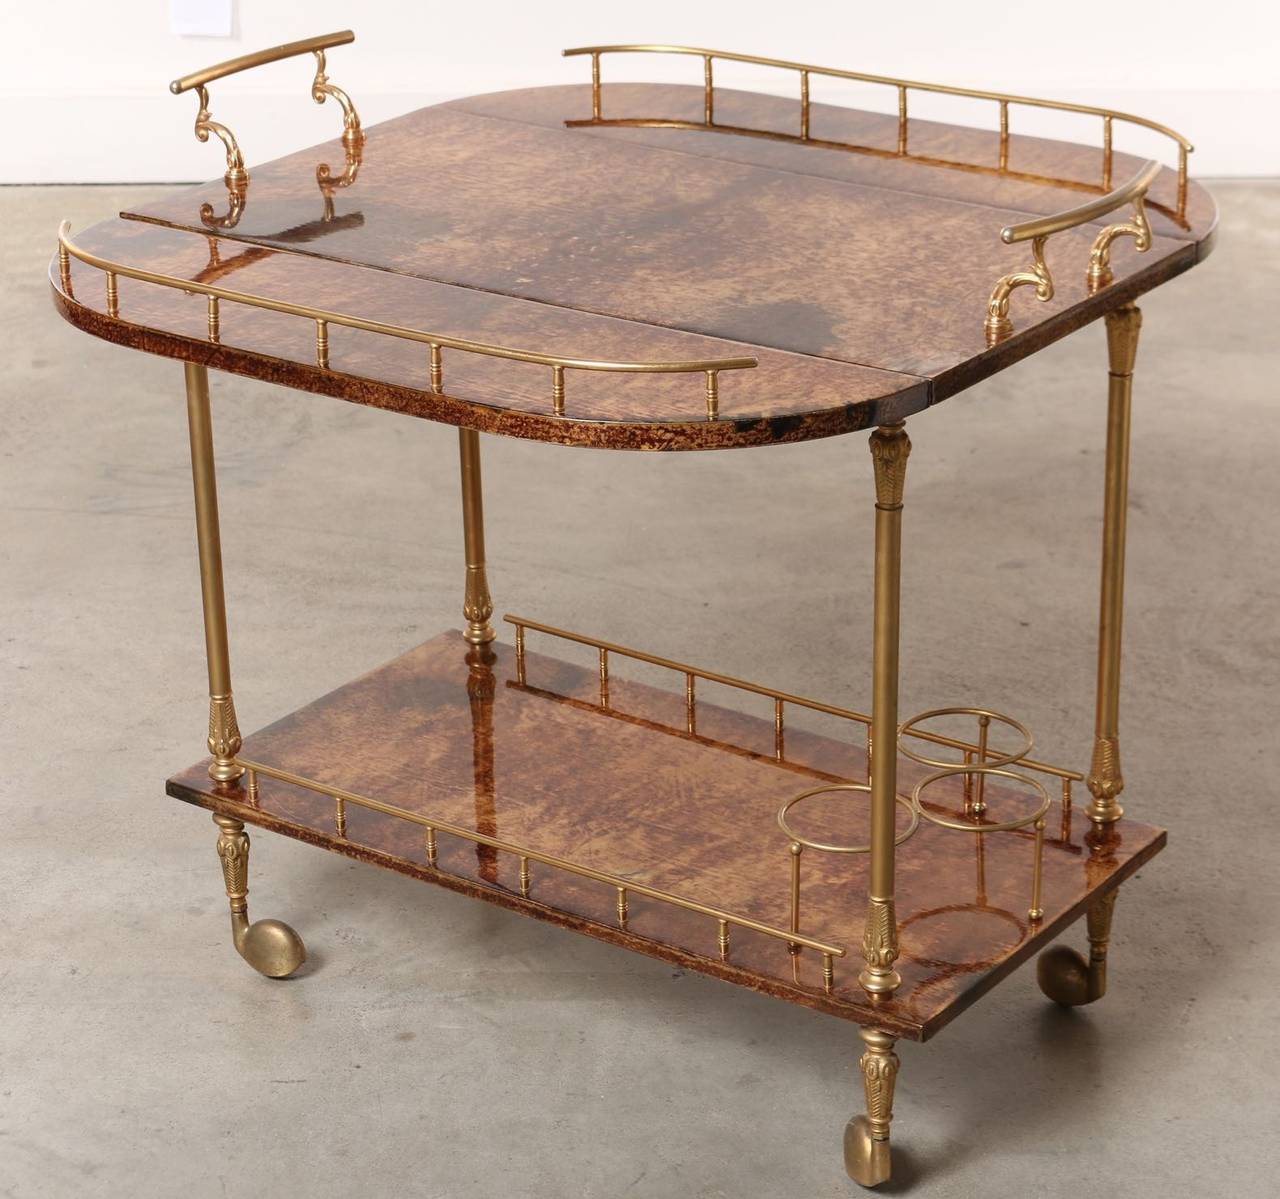 It's not surprising that this outstanding Mid-Century bar cart has its origins in 1950s Italy. Images of Sophia Loren and Carlo Ponti entertaining around this iconic piece spring to mind just looking at it. Ah, la dolce vita, the beautiful life.